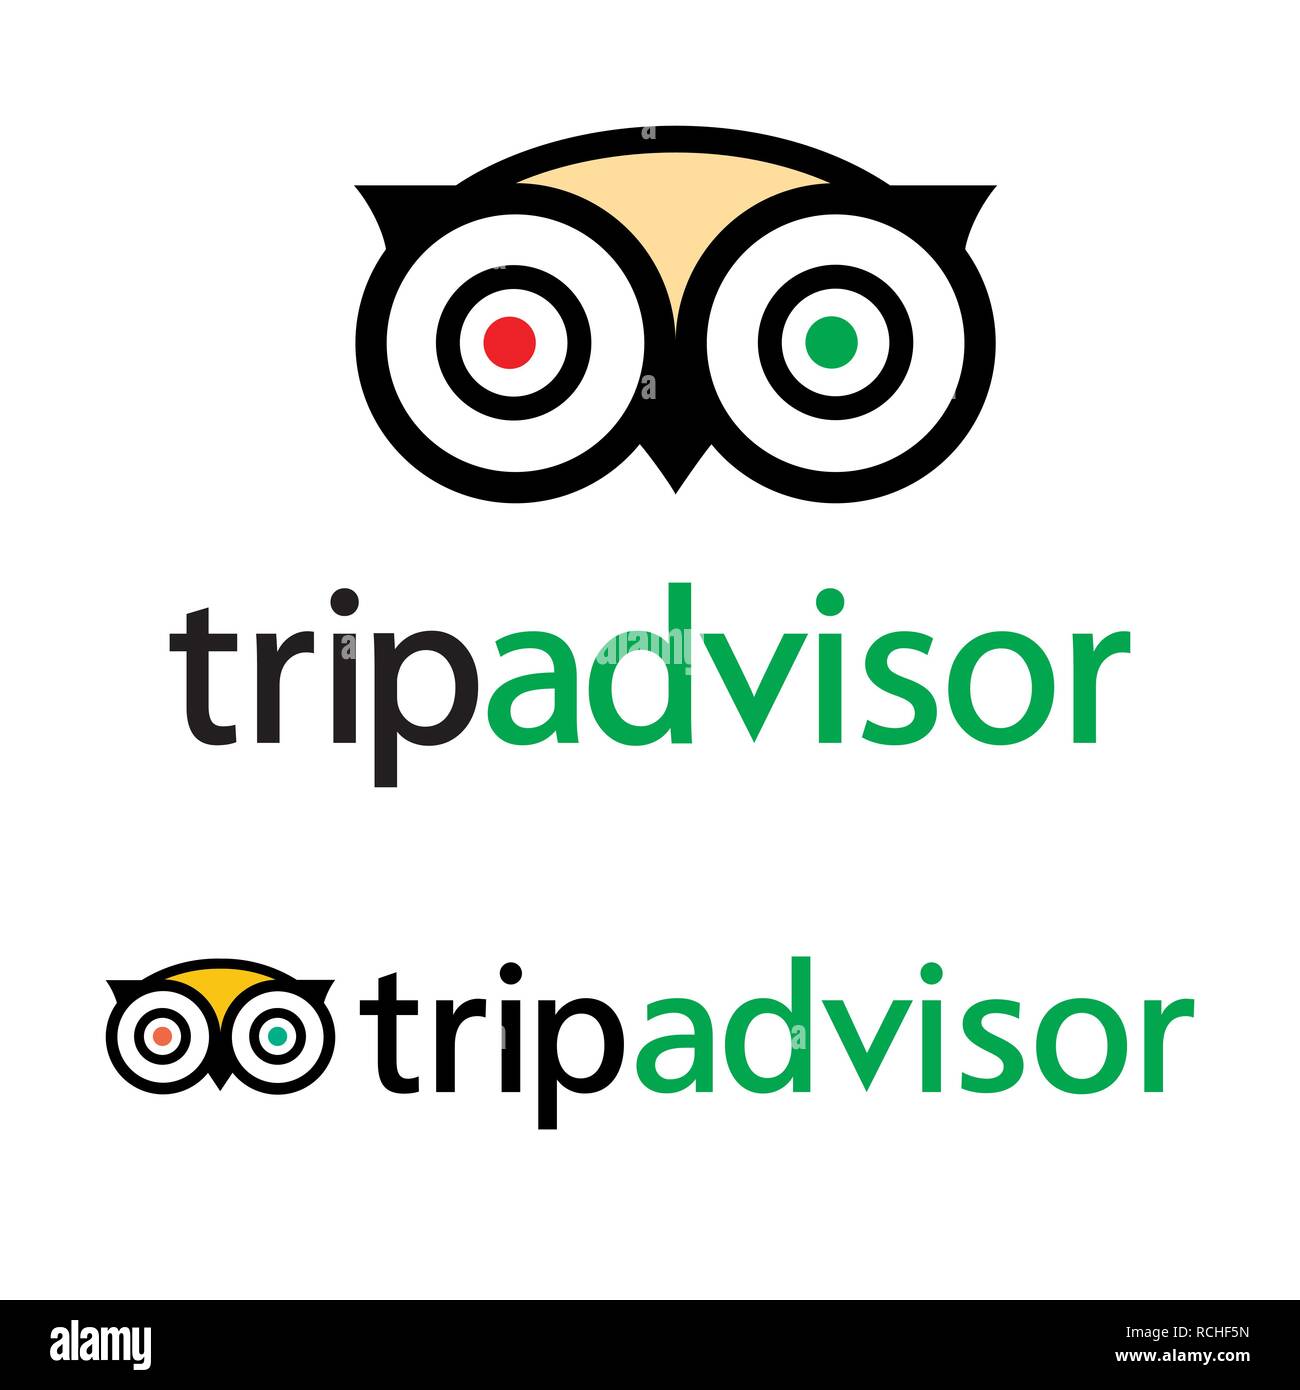 Tripadvisor logo icon vector - popular service with rating of hotels and attractions for travel. Stock Vector